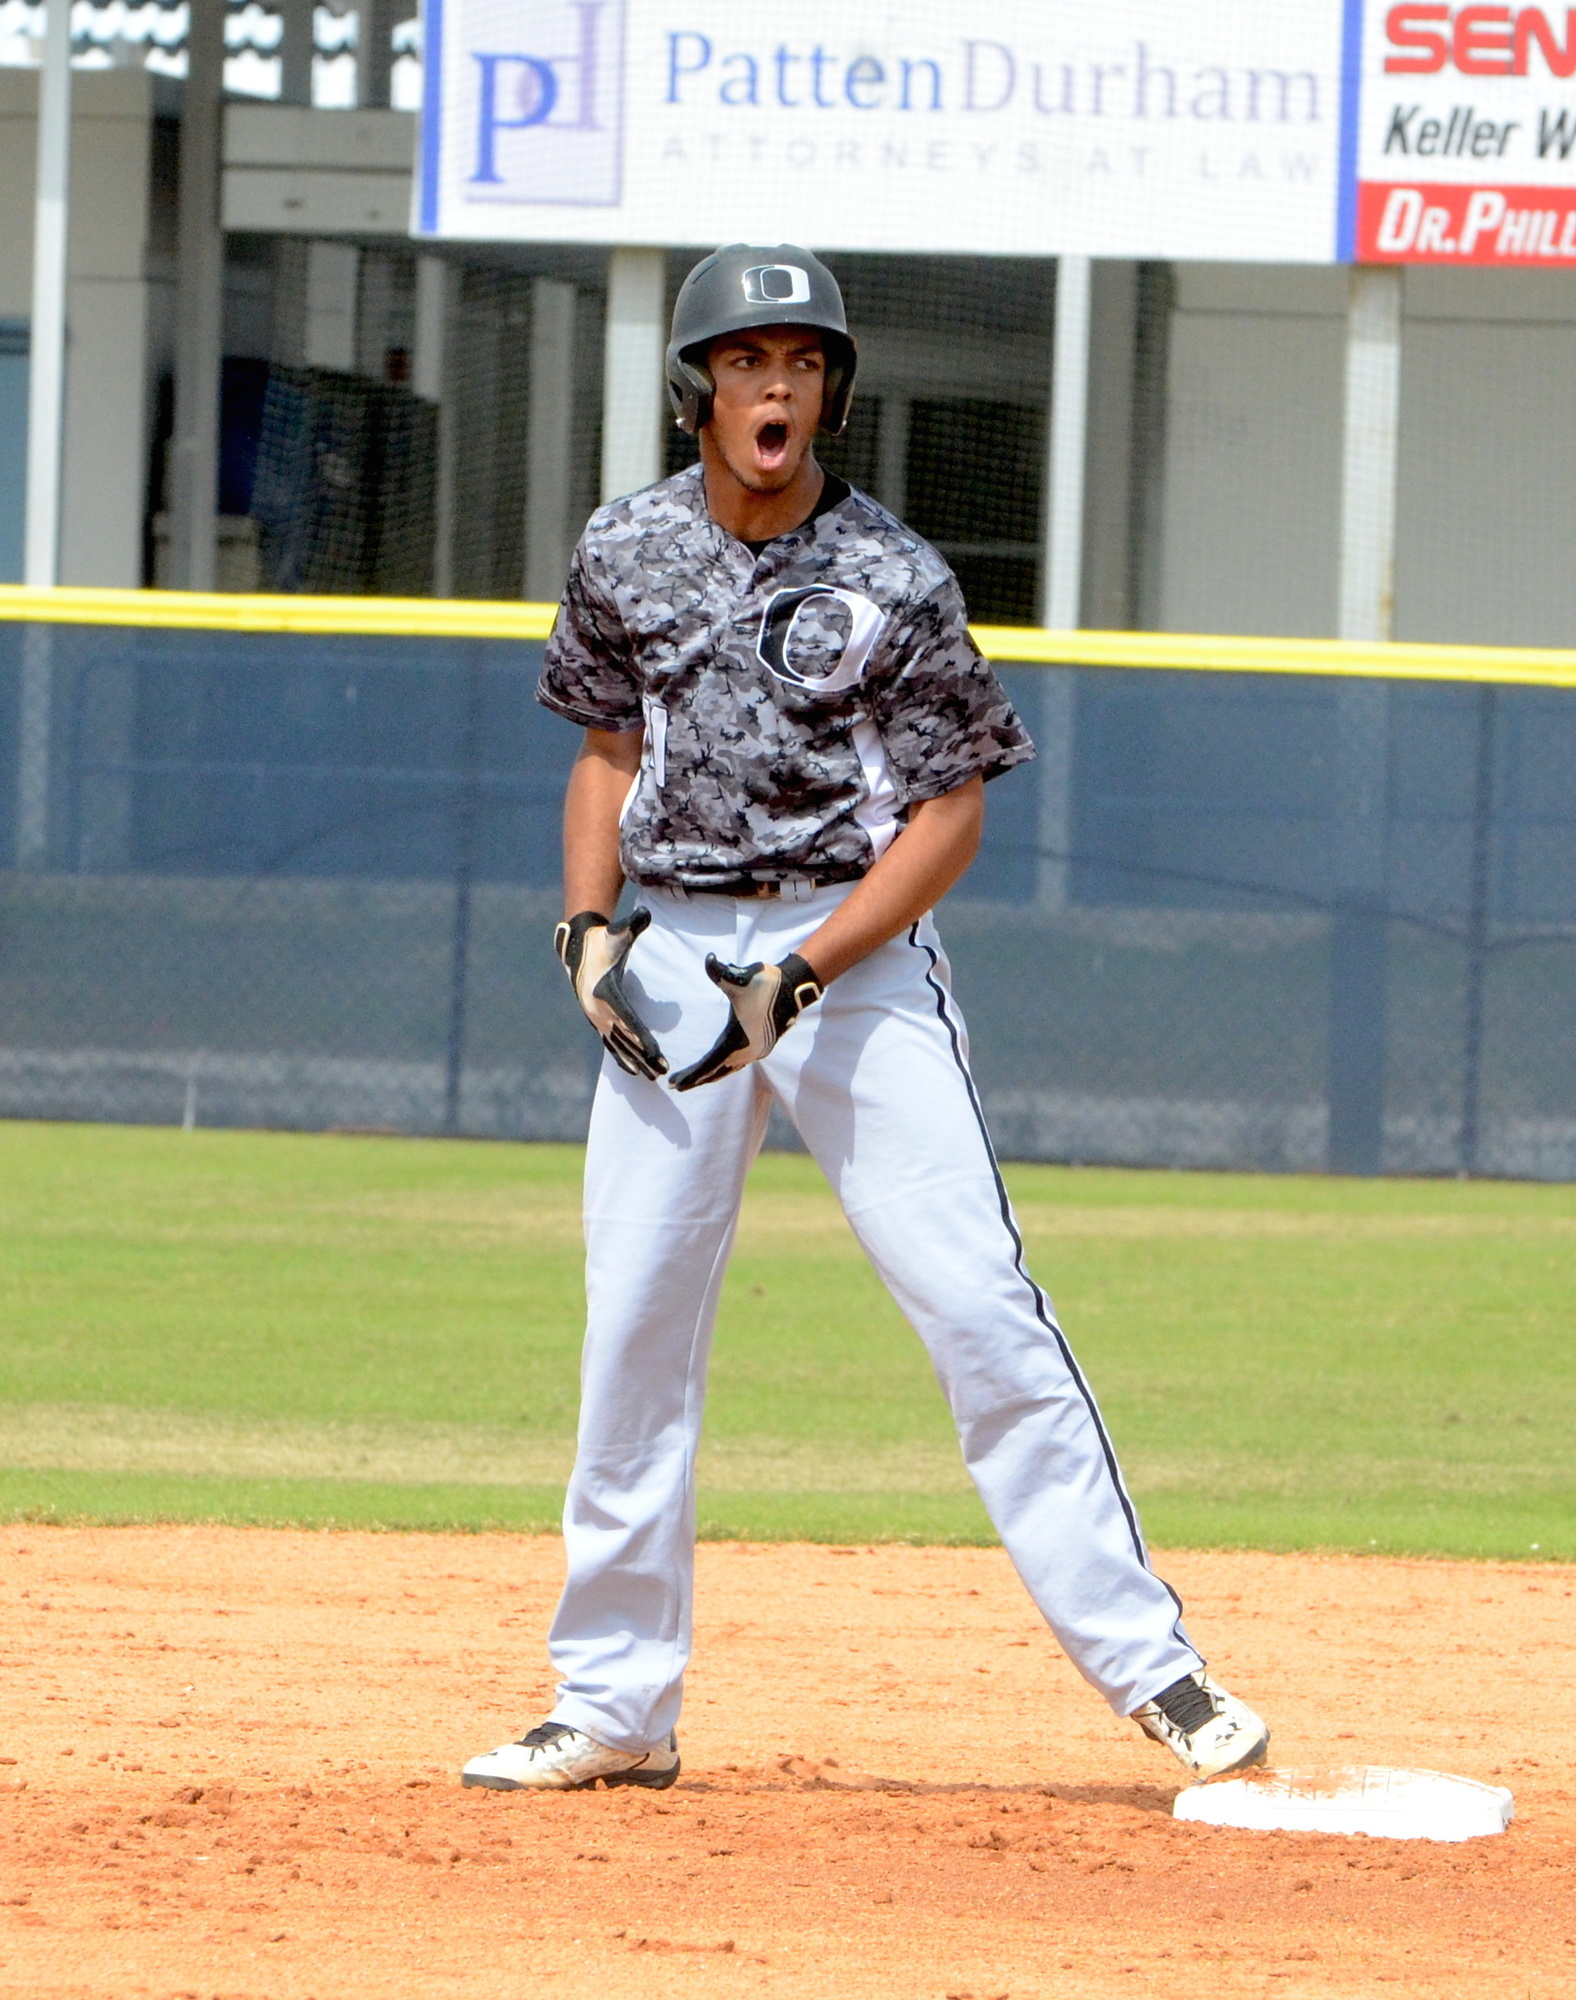 Drenis Ozuna has been a leader for the Titans at the plate.